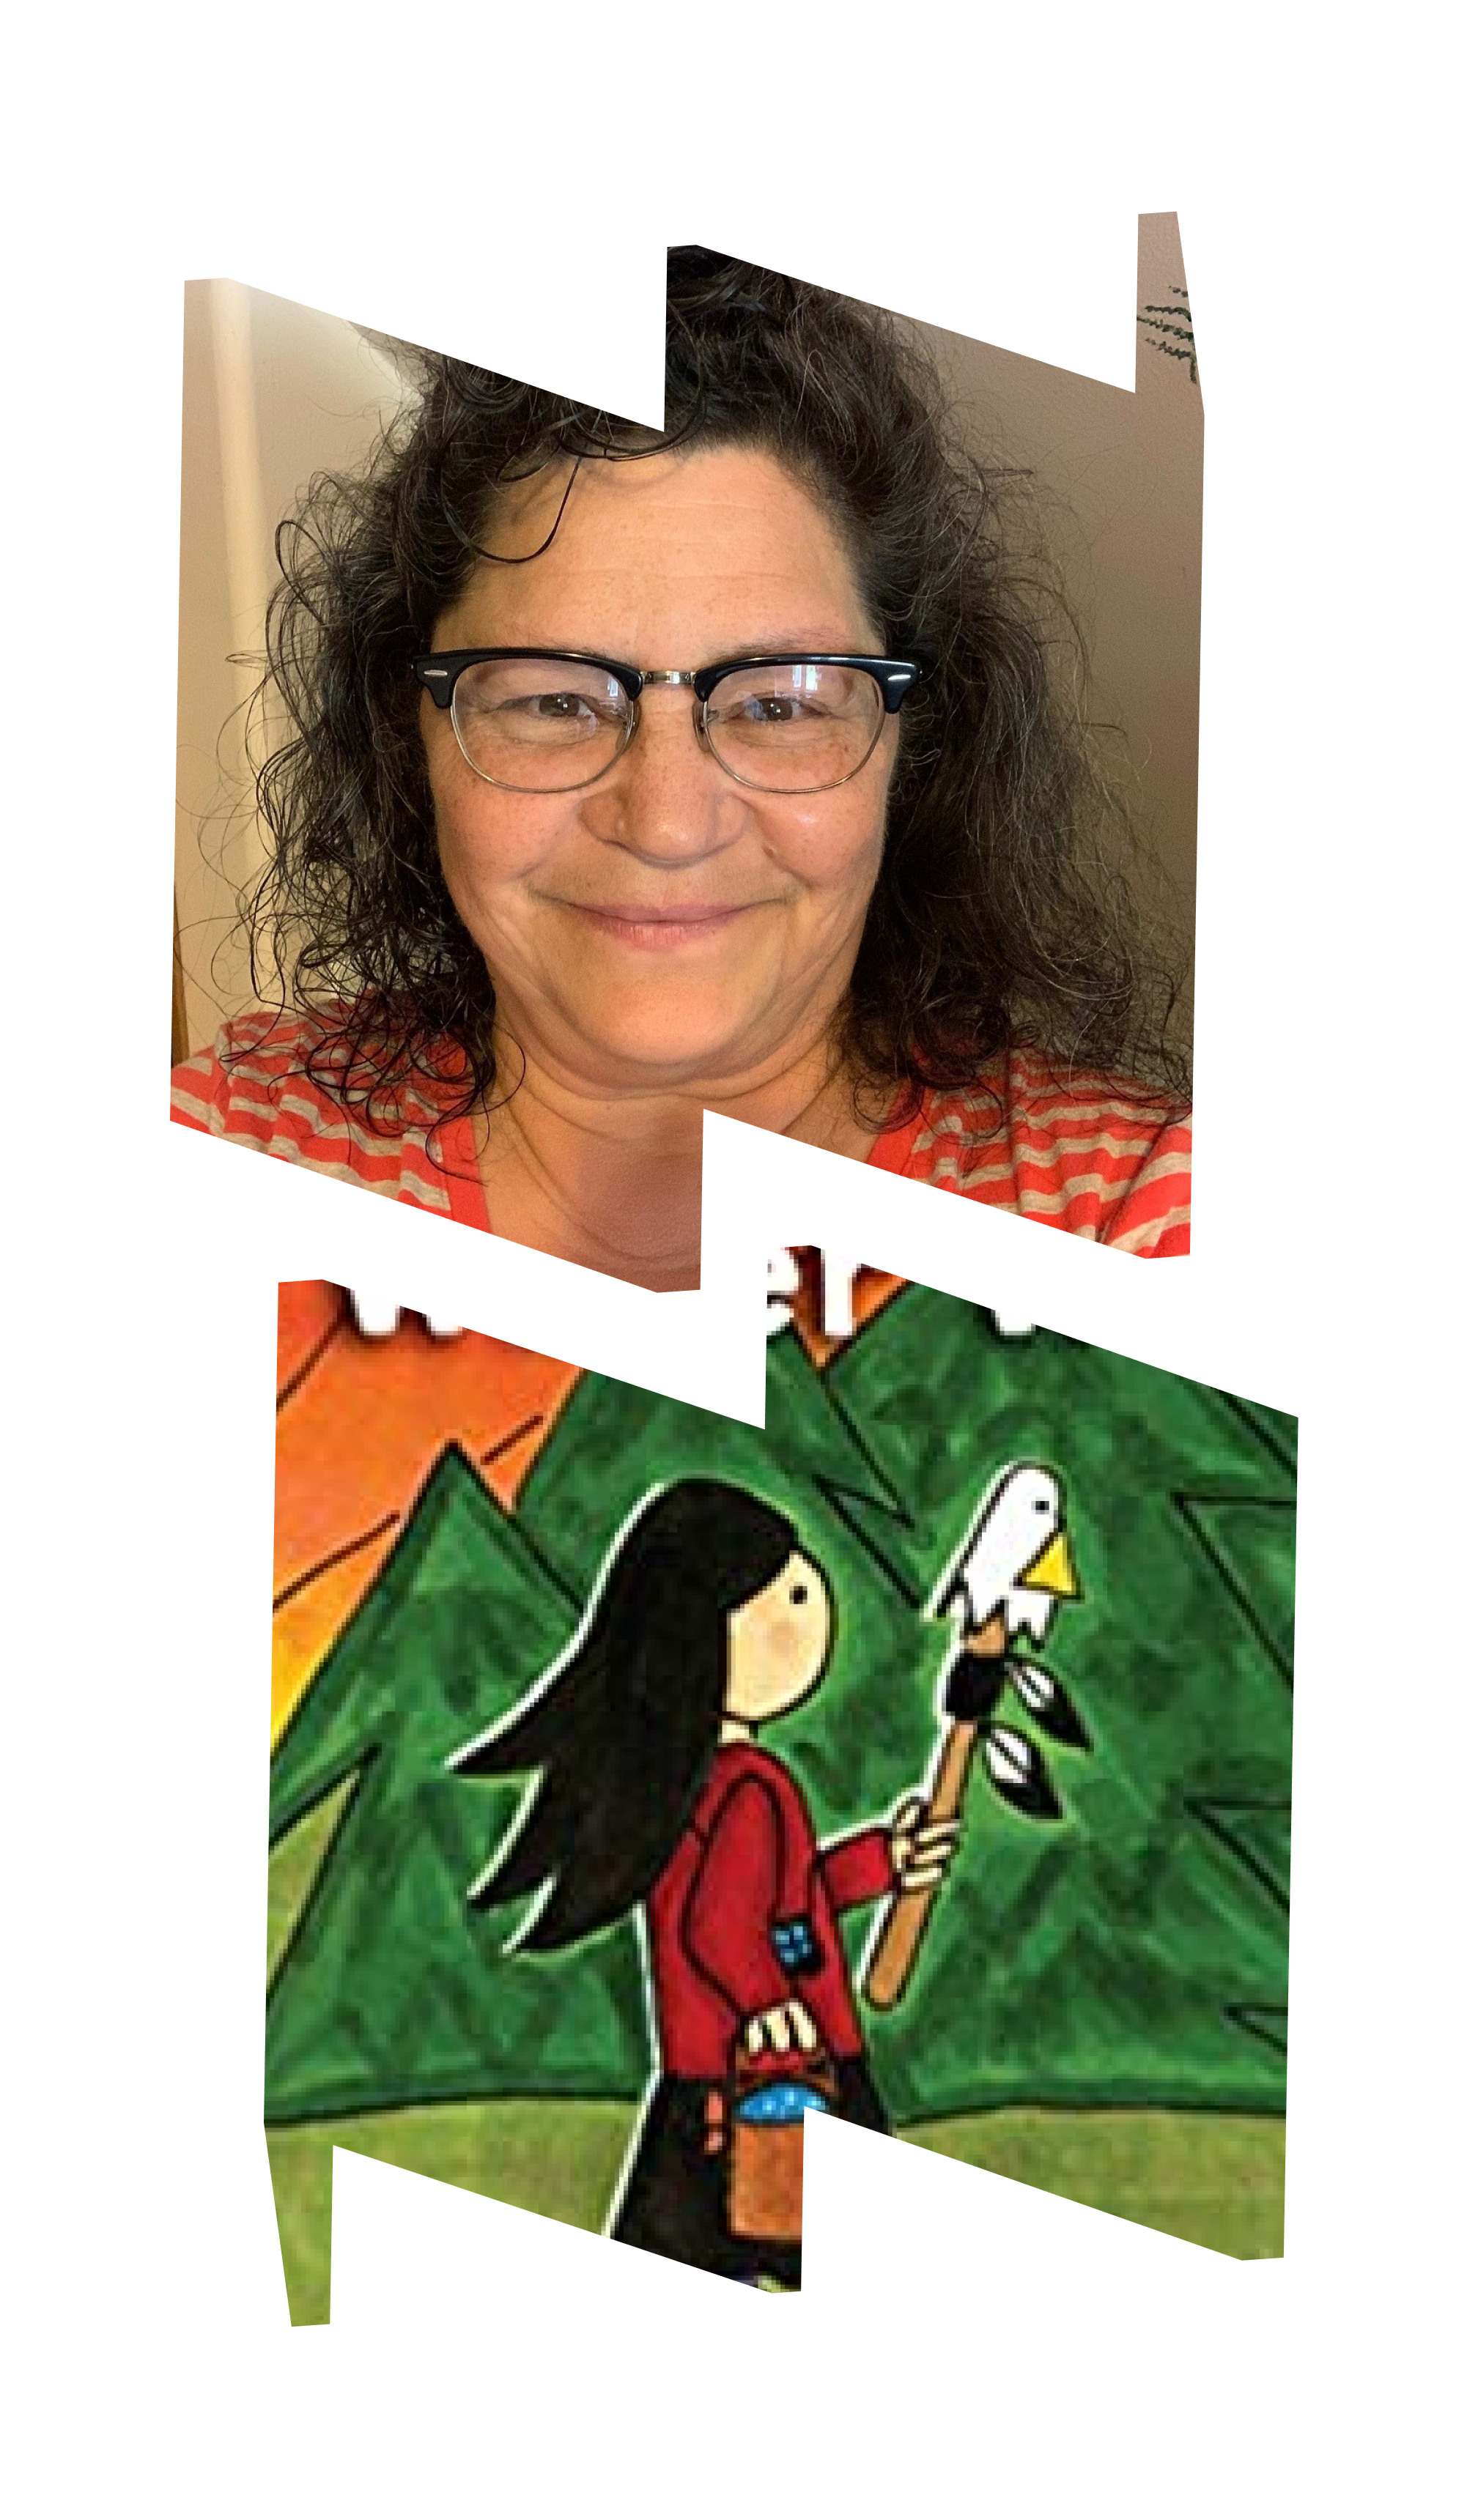 In top "W" frame, headshot of author Joanne Robertson; in bottom "M" frame, image of young girl walking and carrying watering can from cover of the book